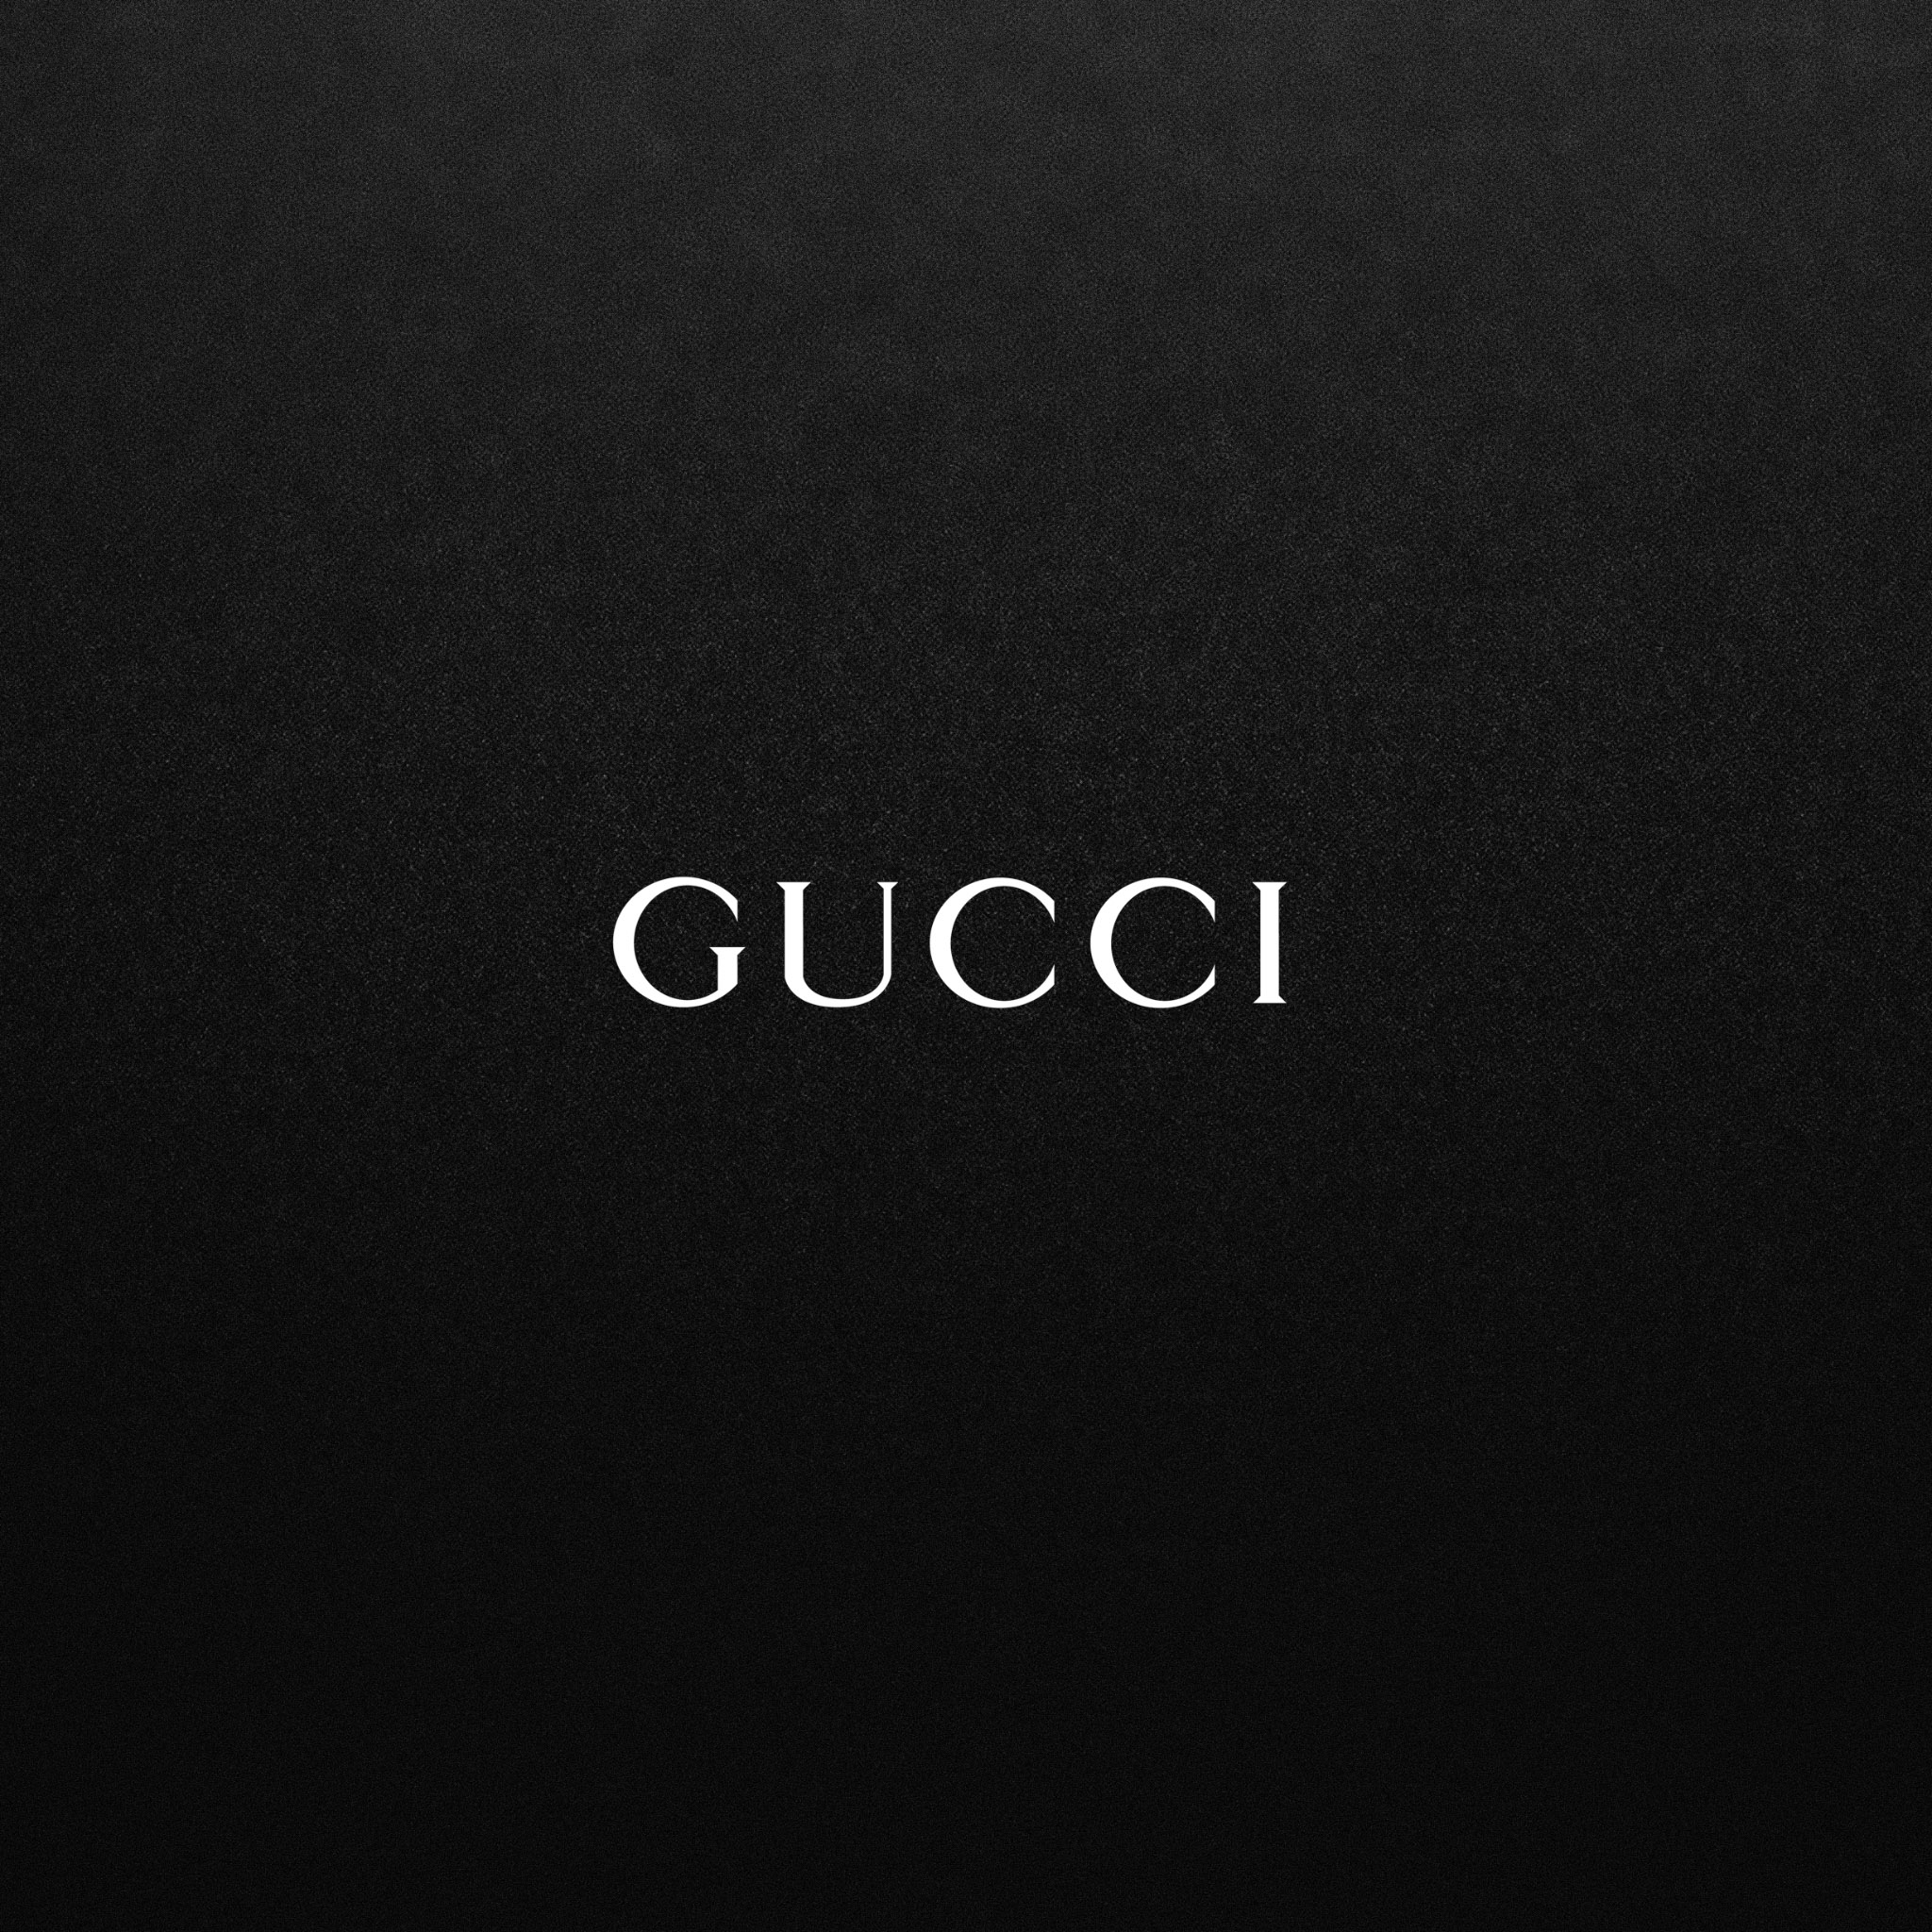 Gucci Wallpaper iPhone Pictures